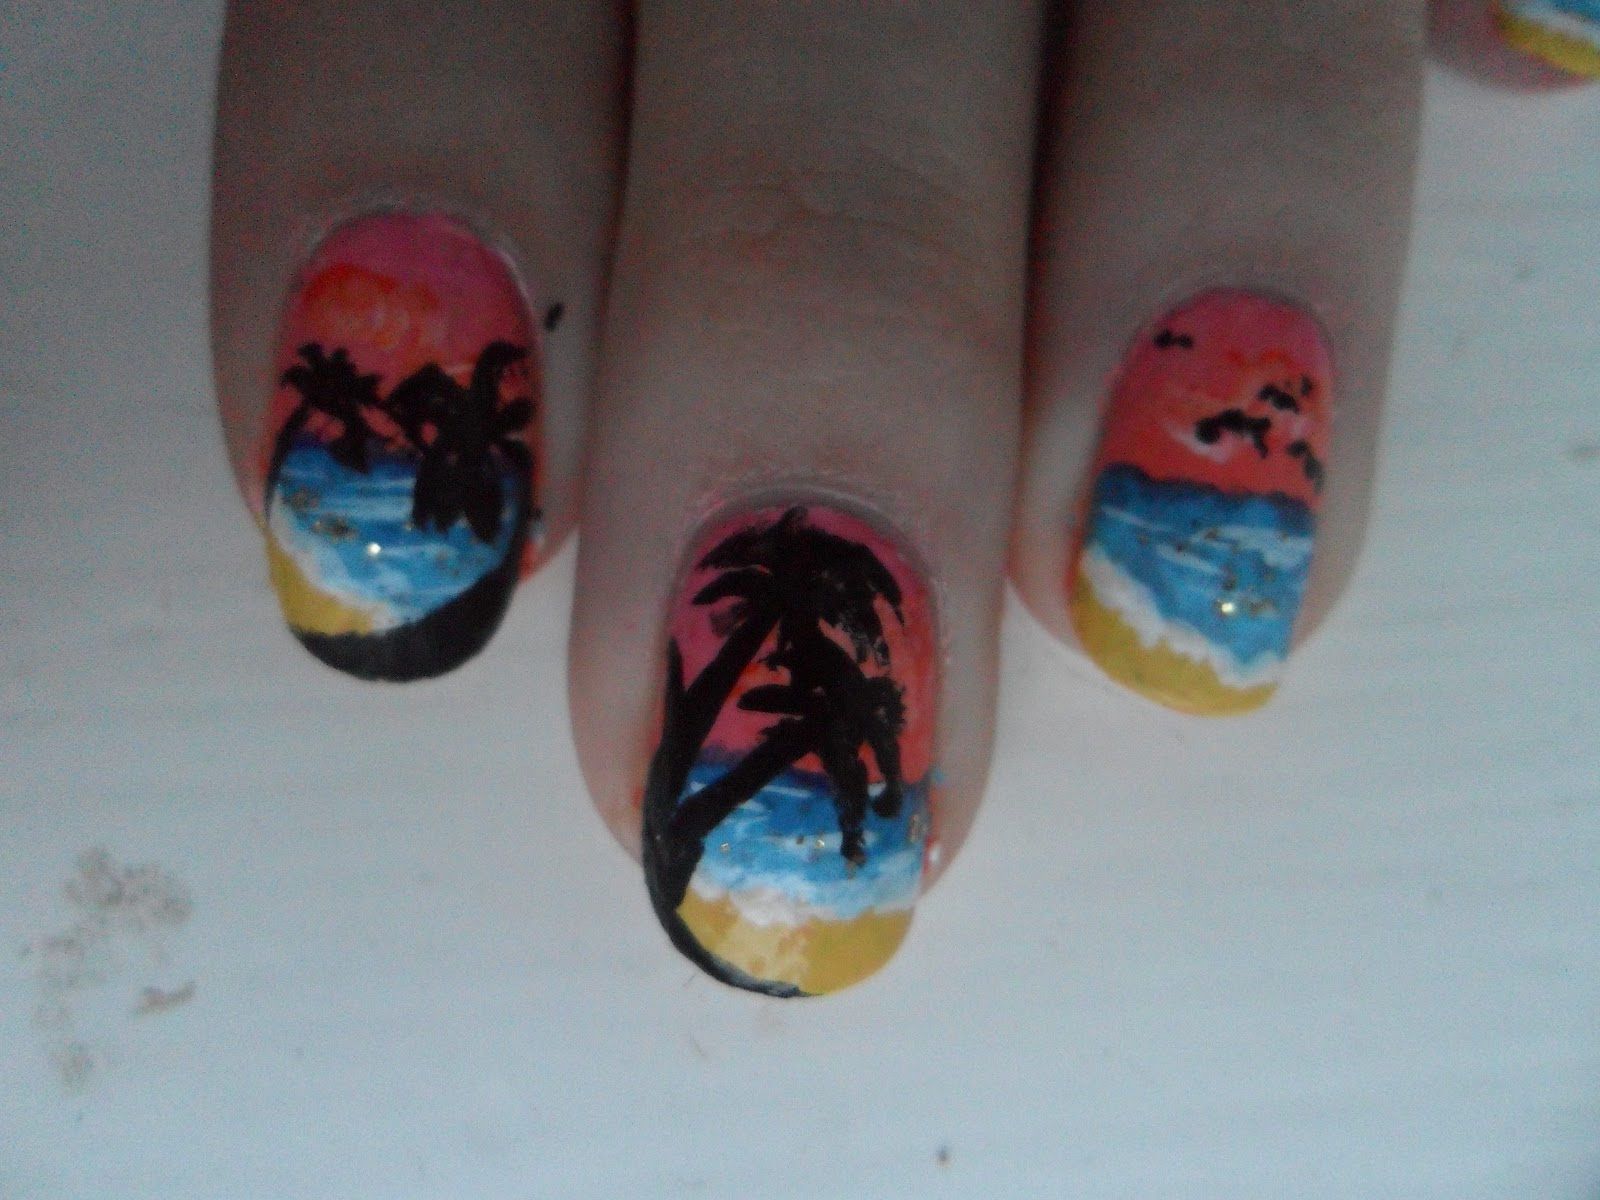 Sara Fisk; Nail Art: Sunset beach nails with palm trees and surfer guy